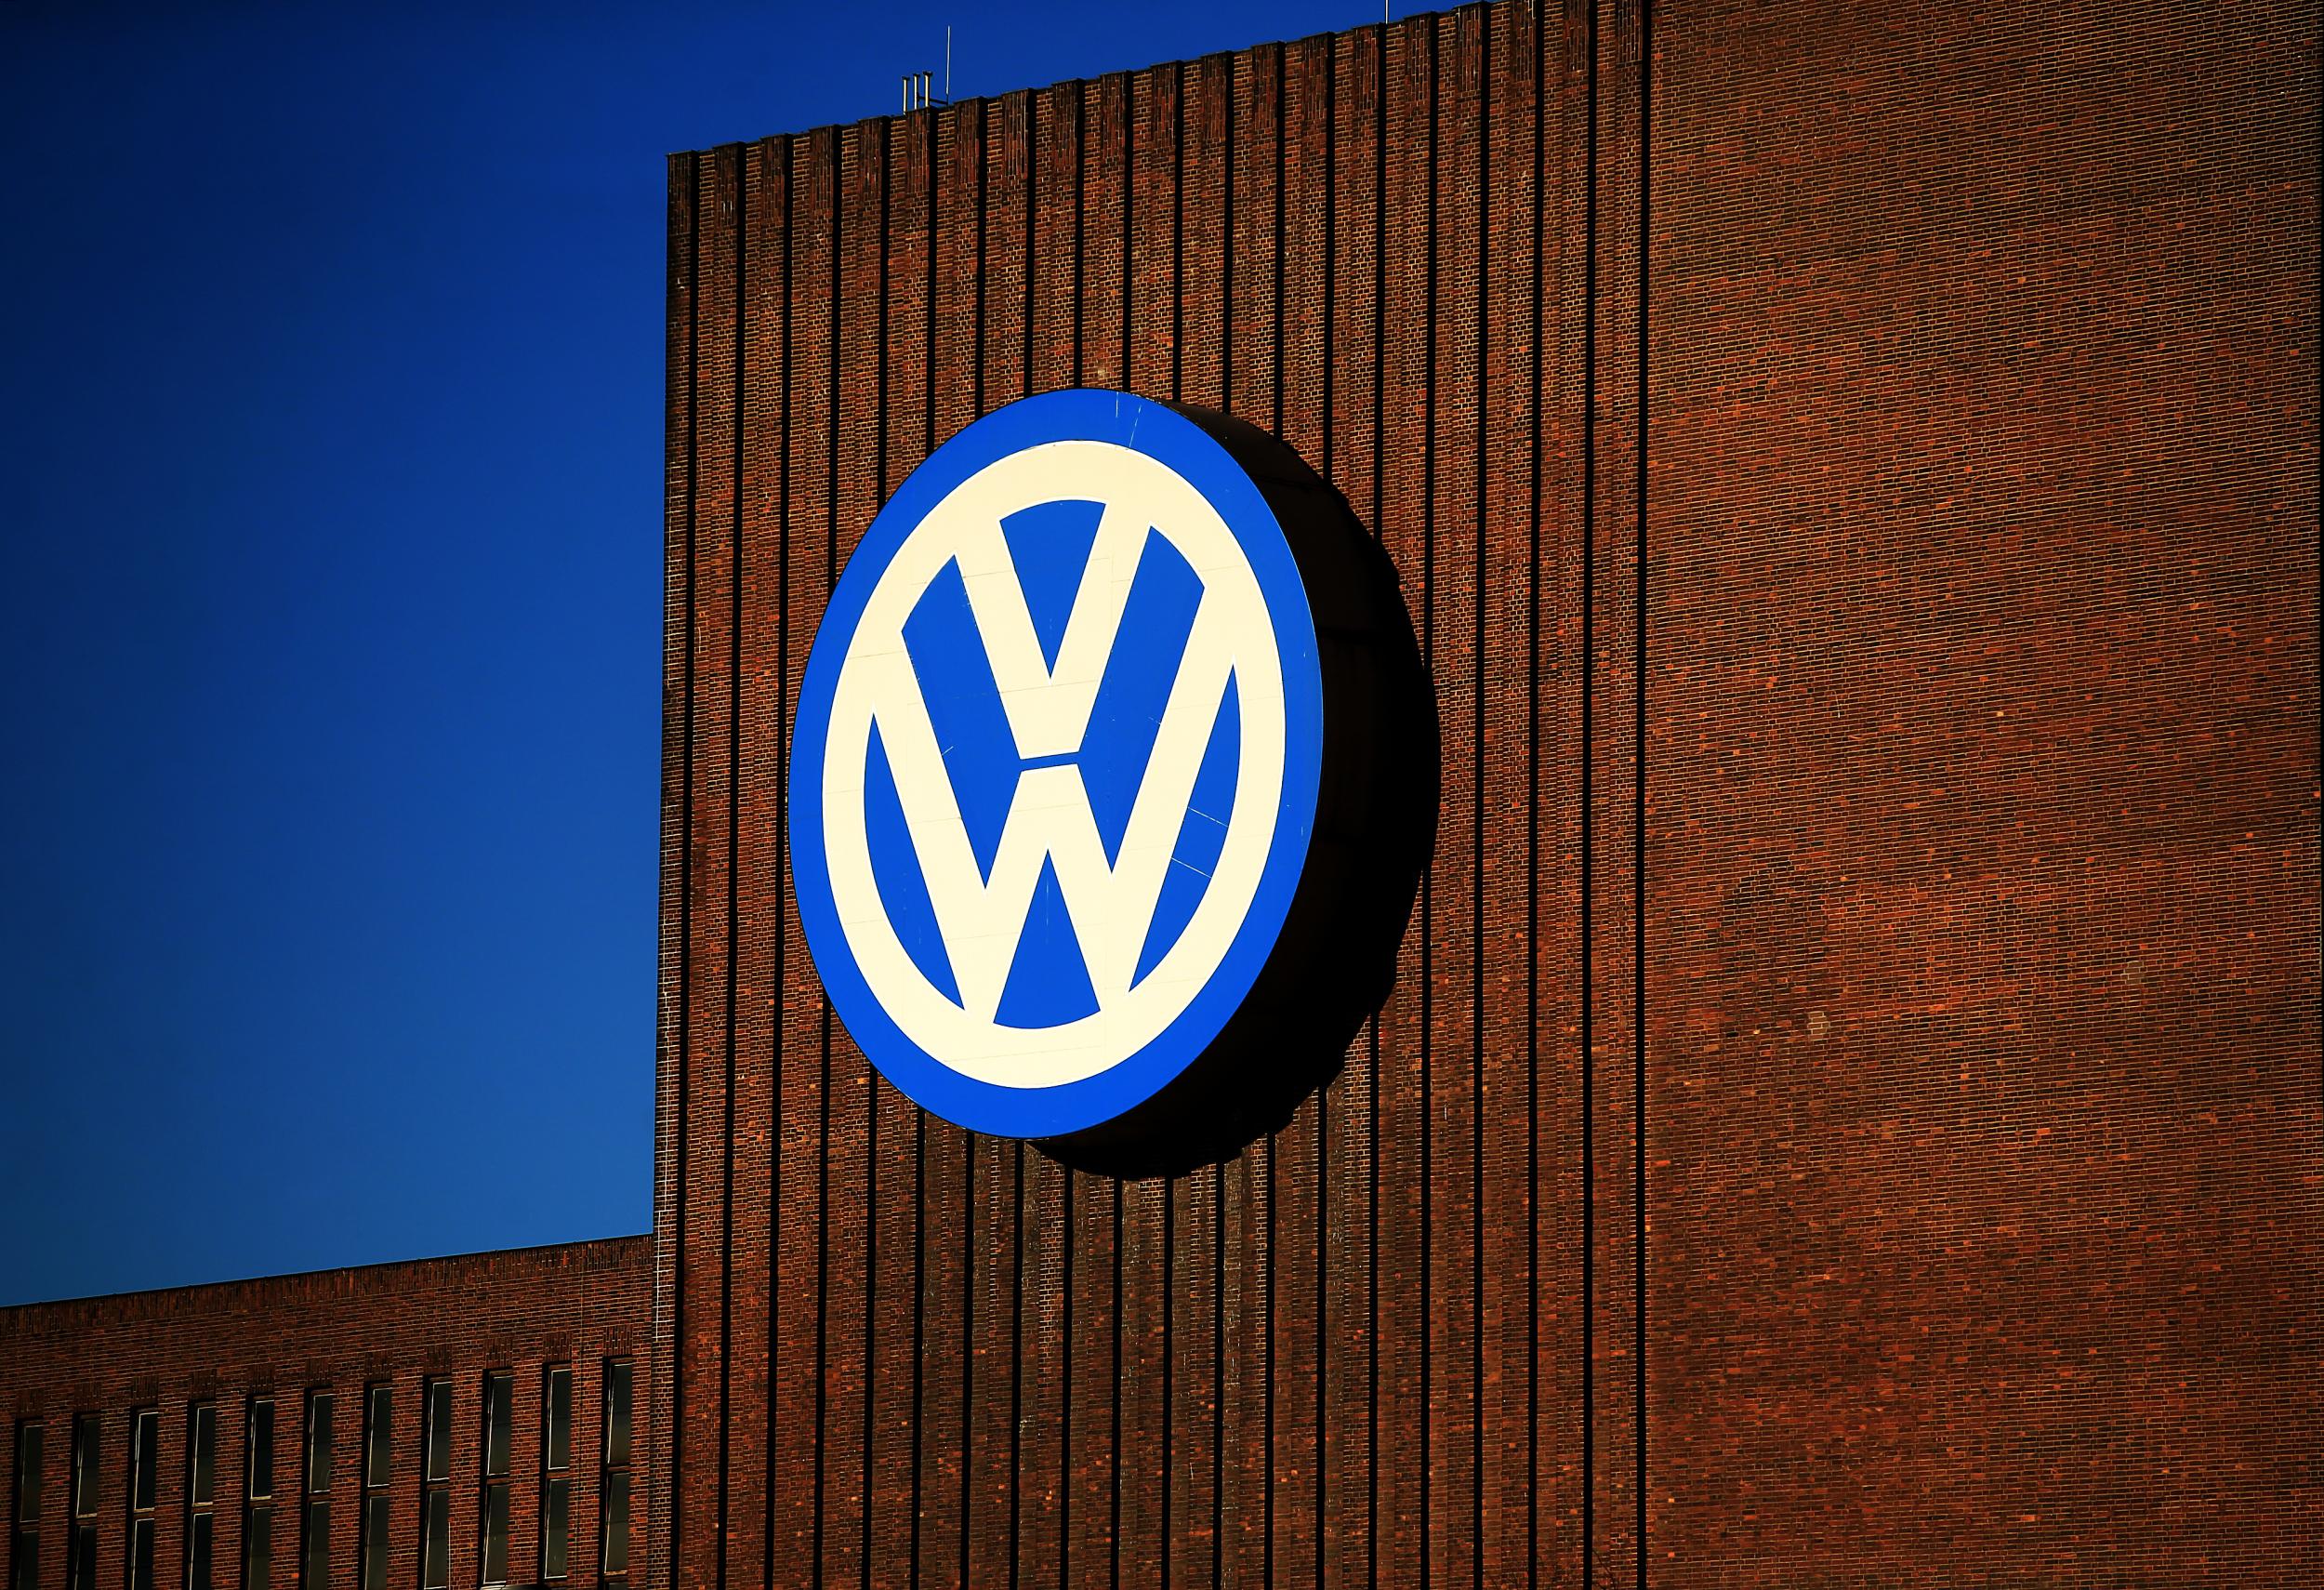 VW has been rocked by an emissions scandal